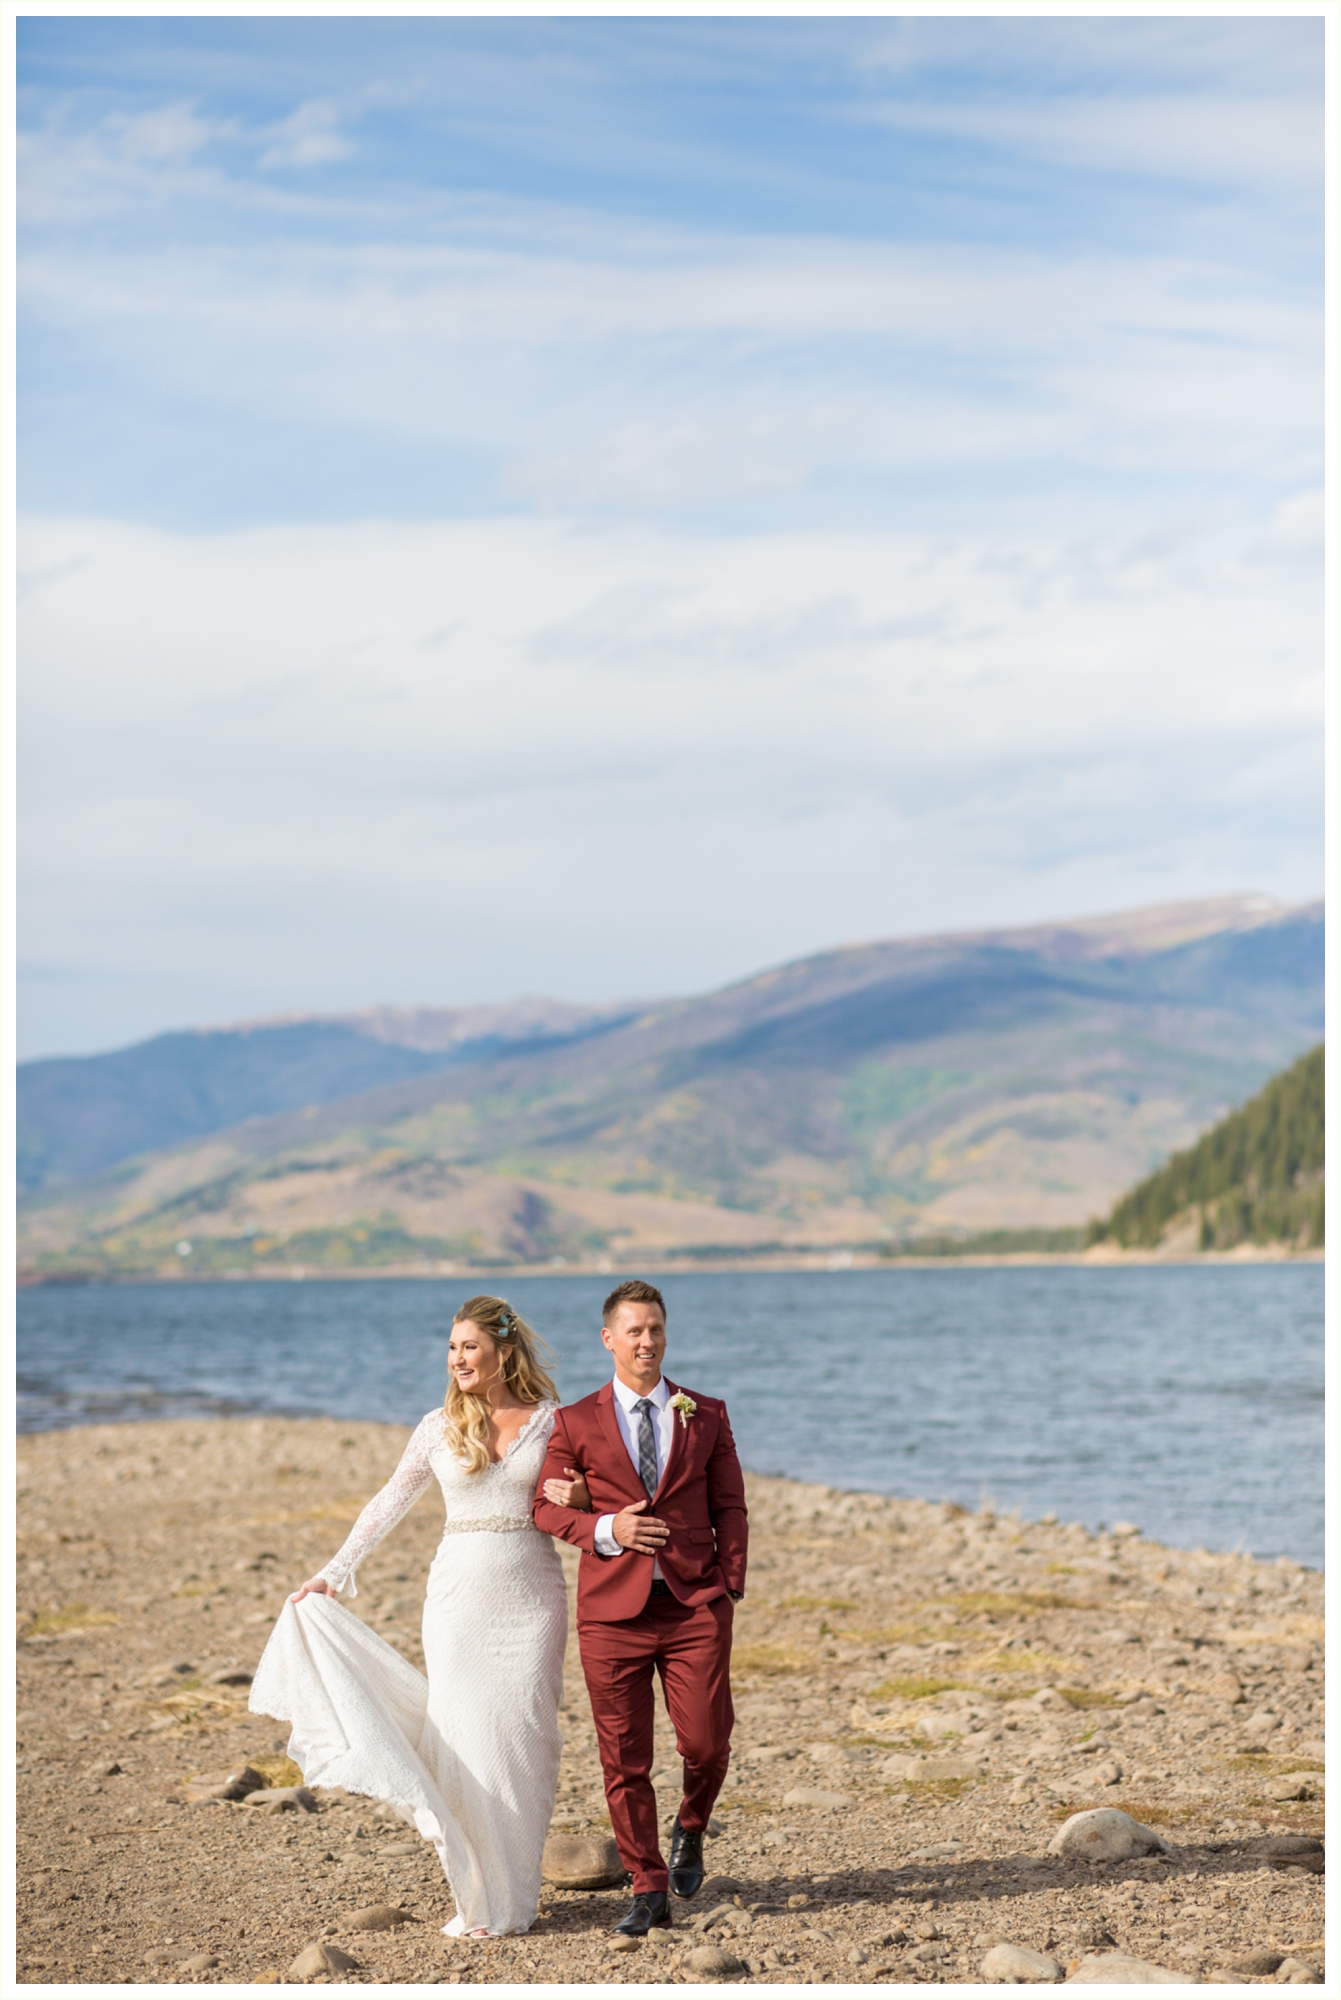 bride and groom photos at lake dillon before sapphire point elopement groom wears maroon suit bride has long sleeved dress walking candid photos beautiful rocky mountains